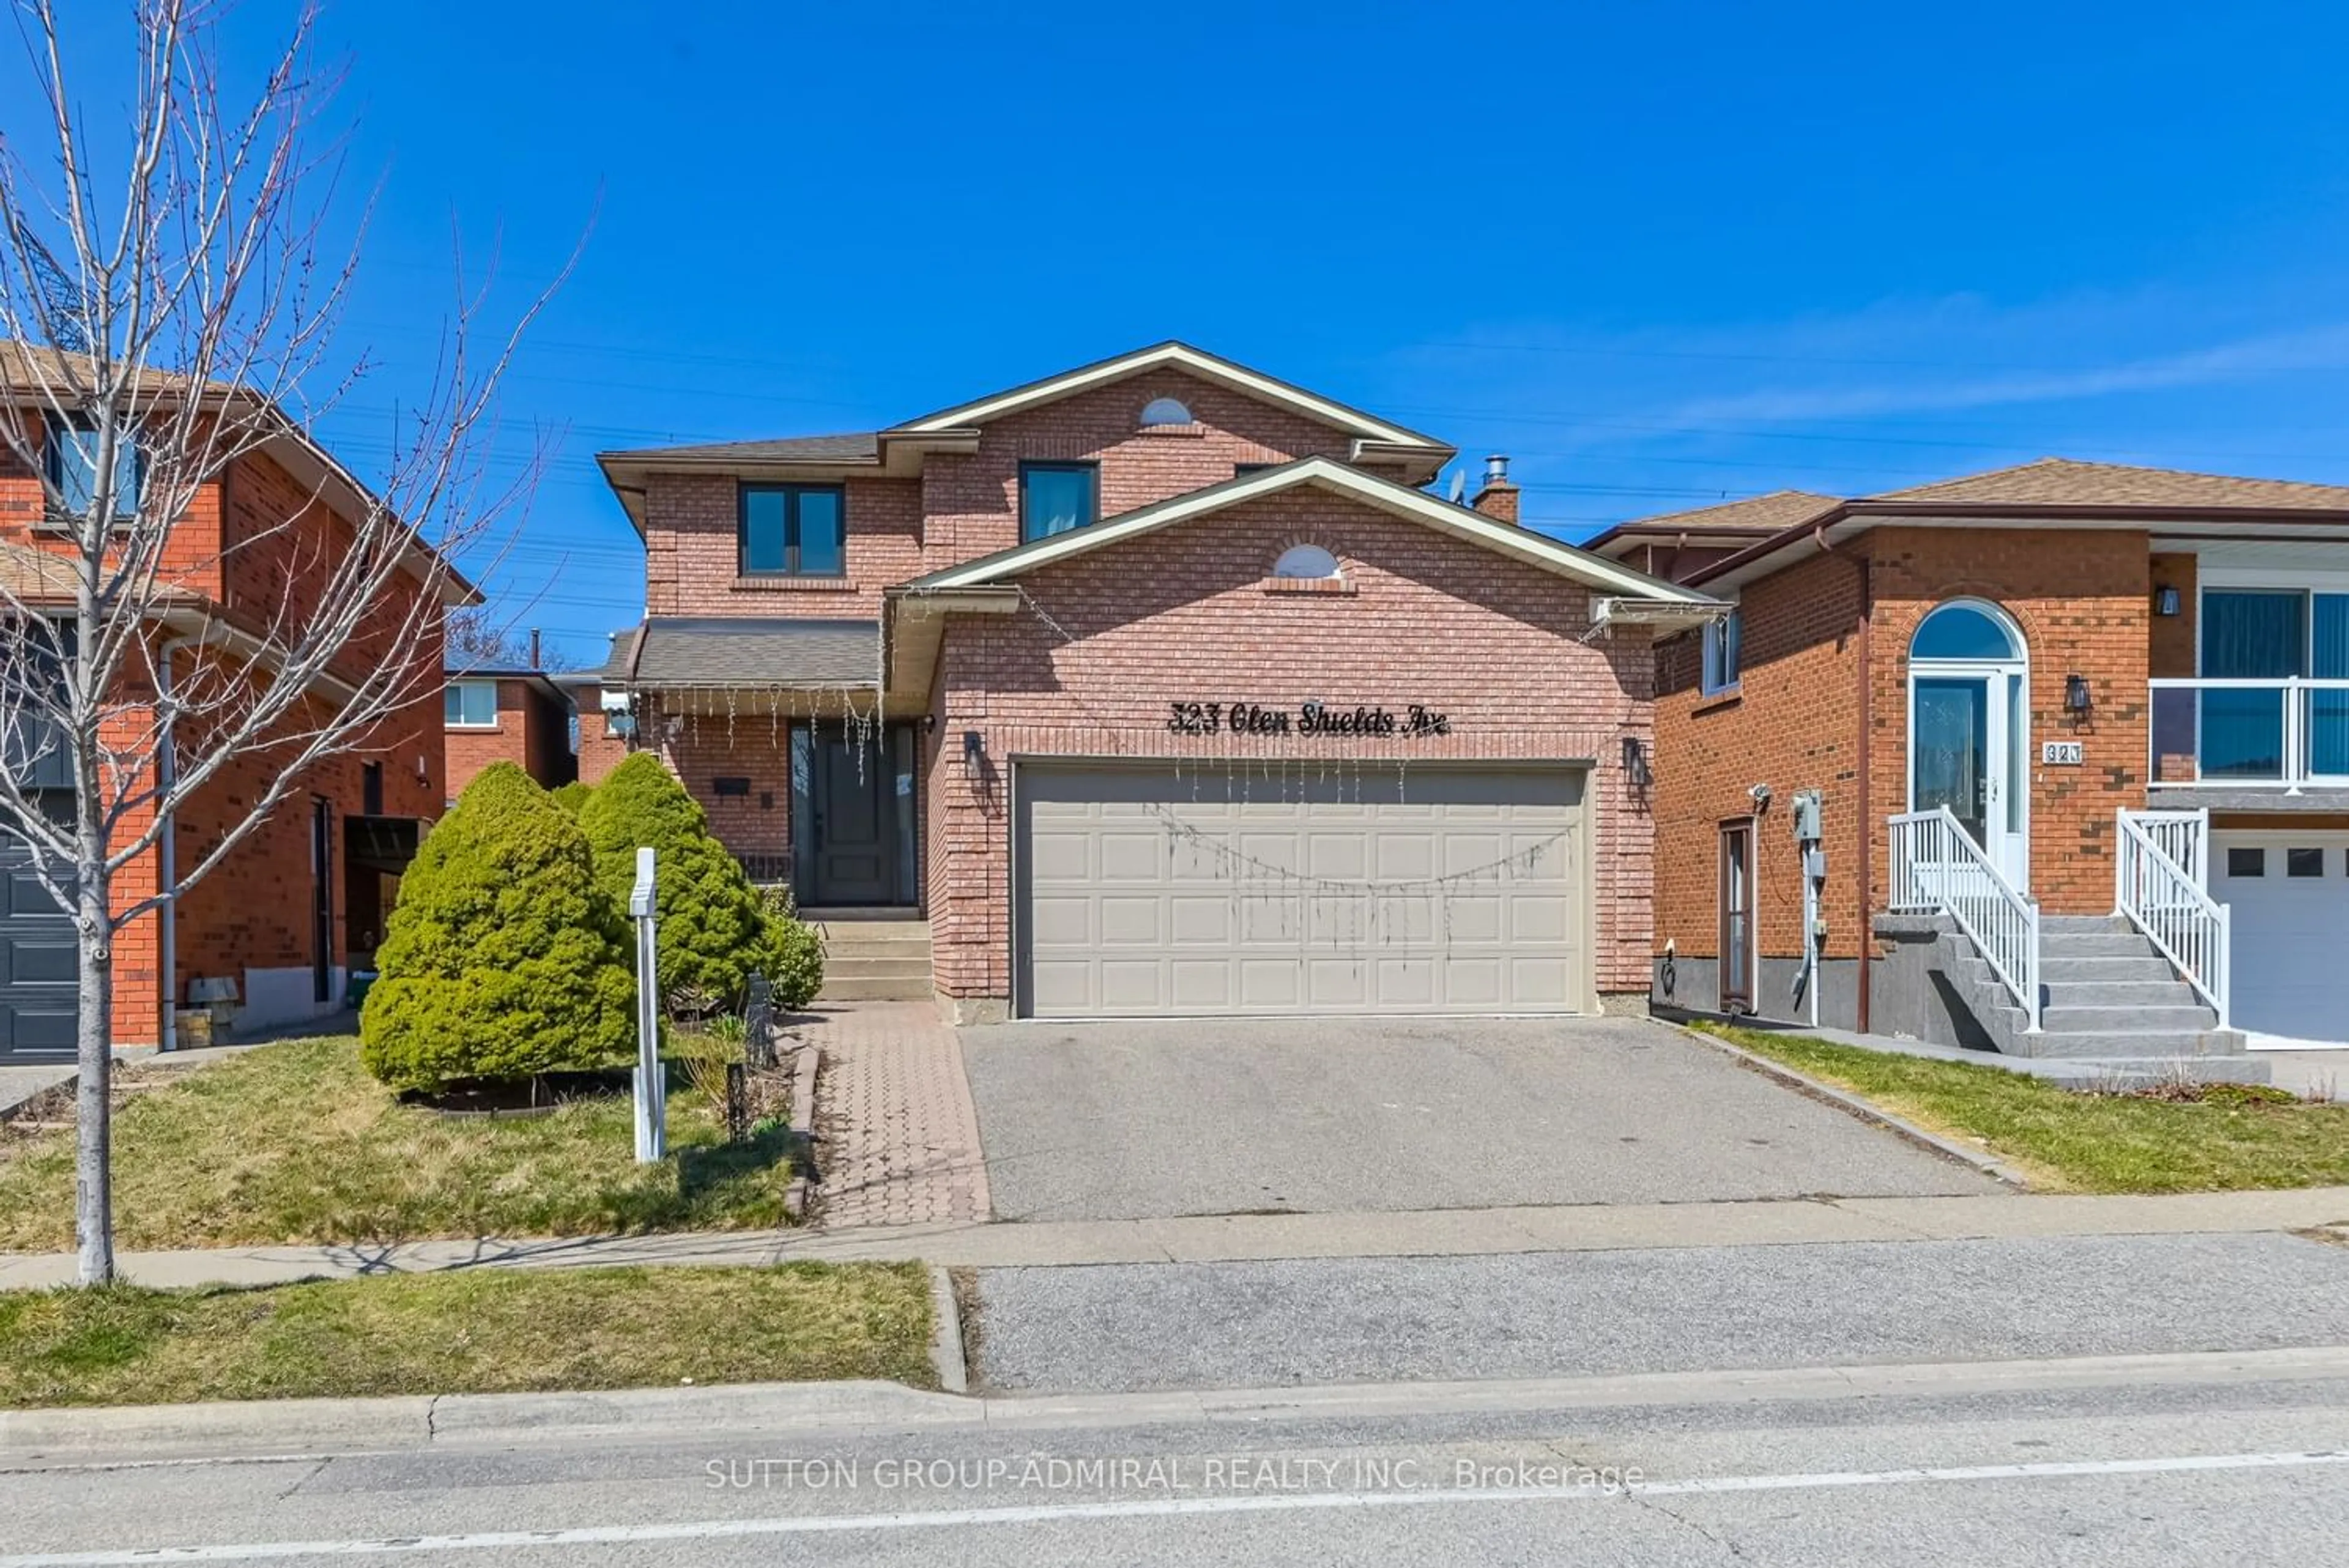 Home with brick exterior material for 323 Glen Shields Ave, Vaughan Ontario L4K 1T4